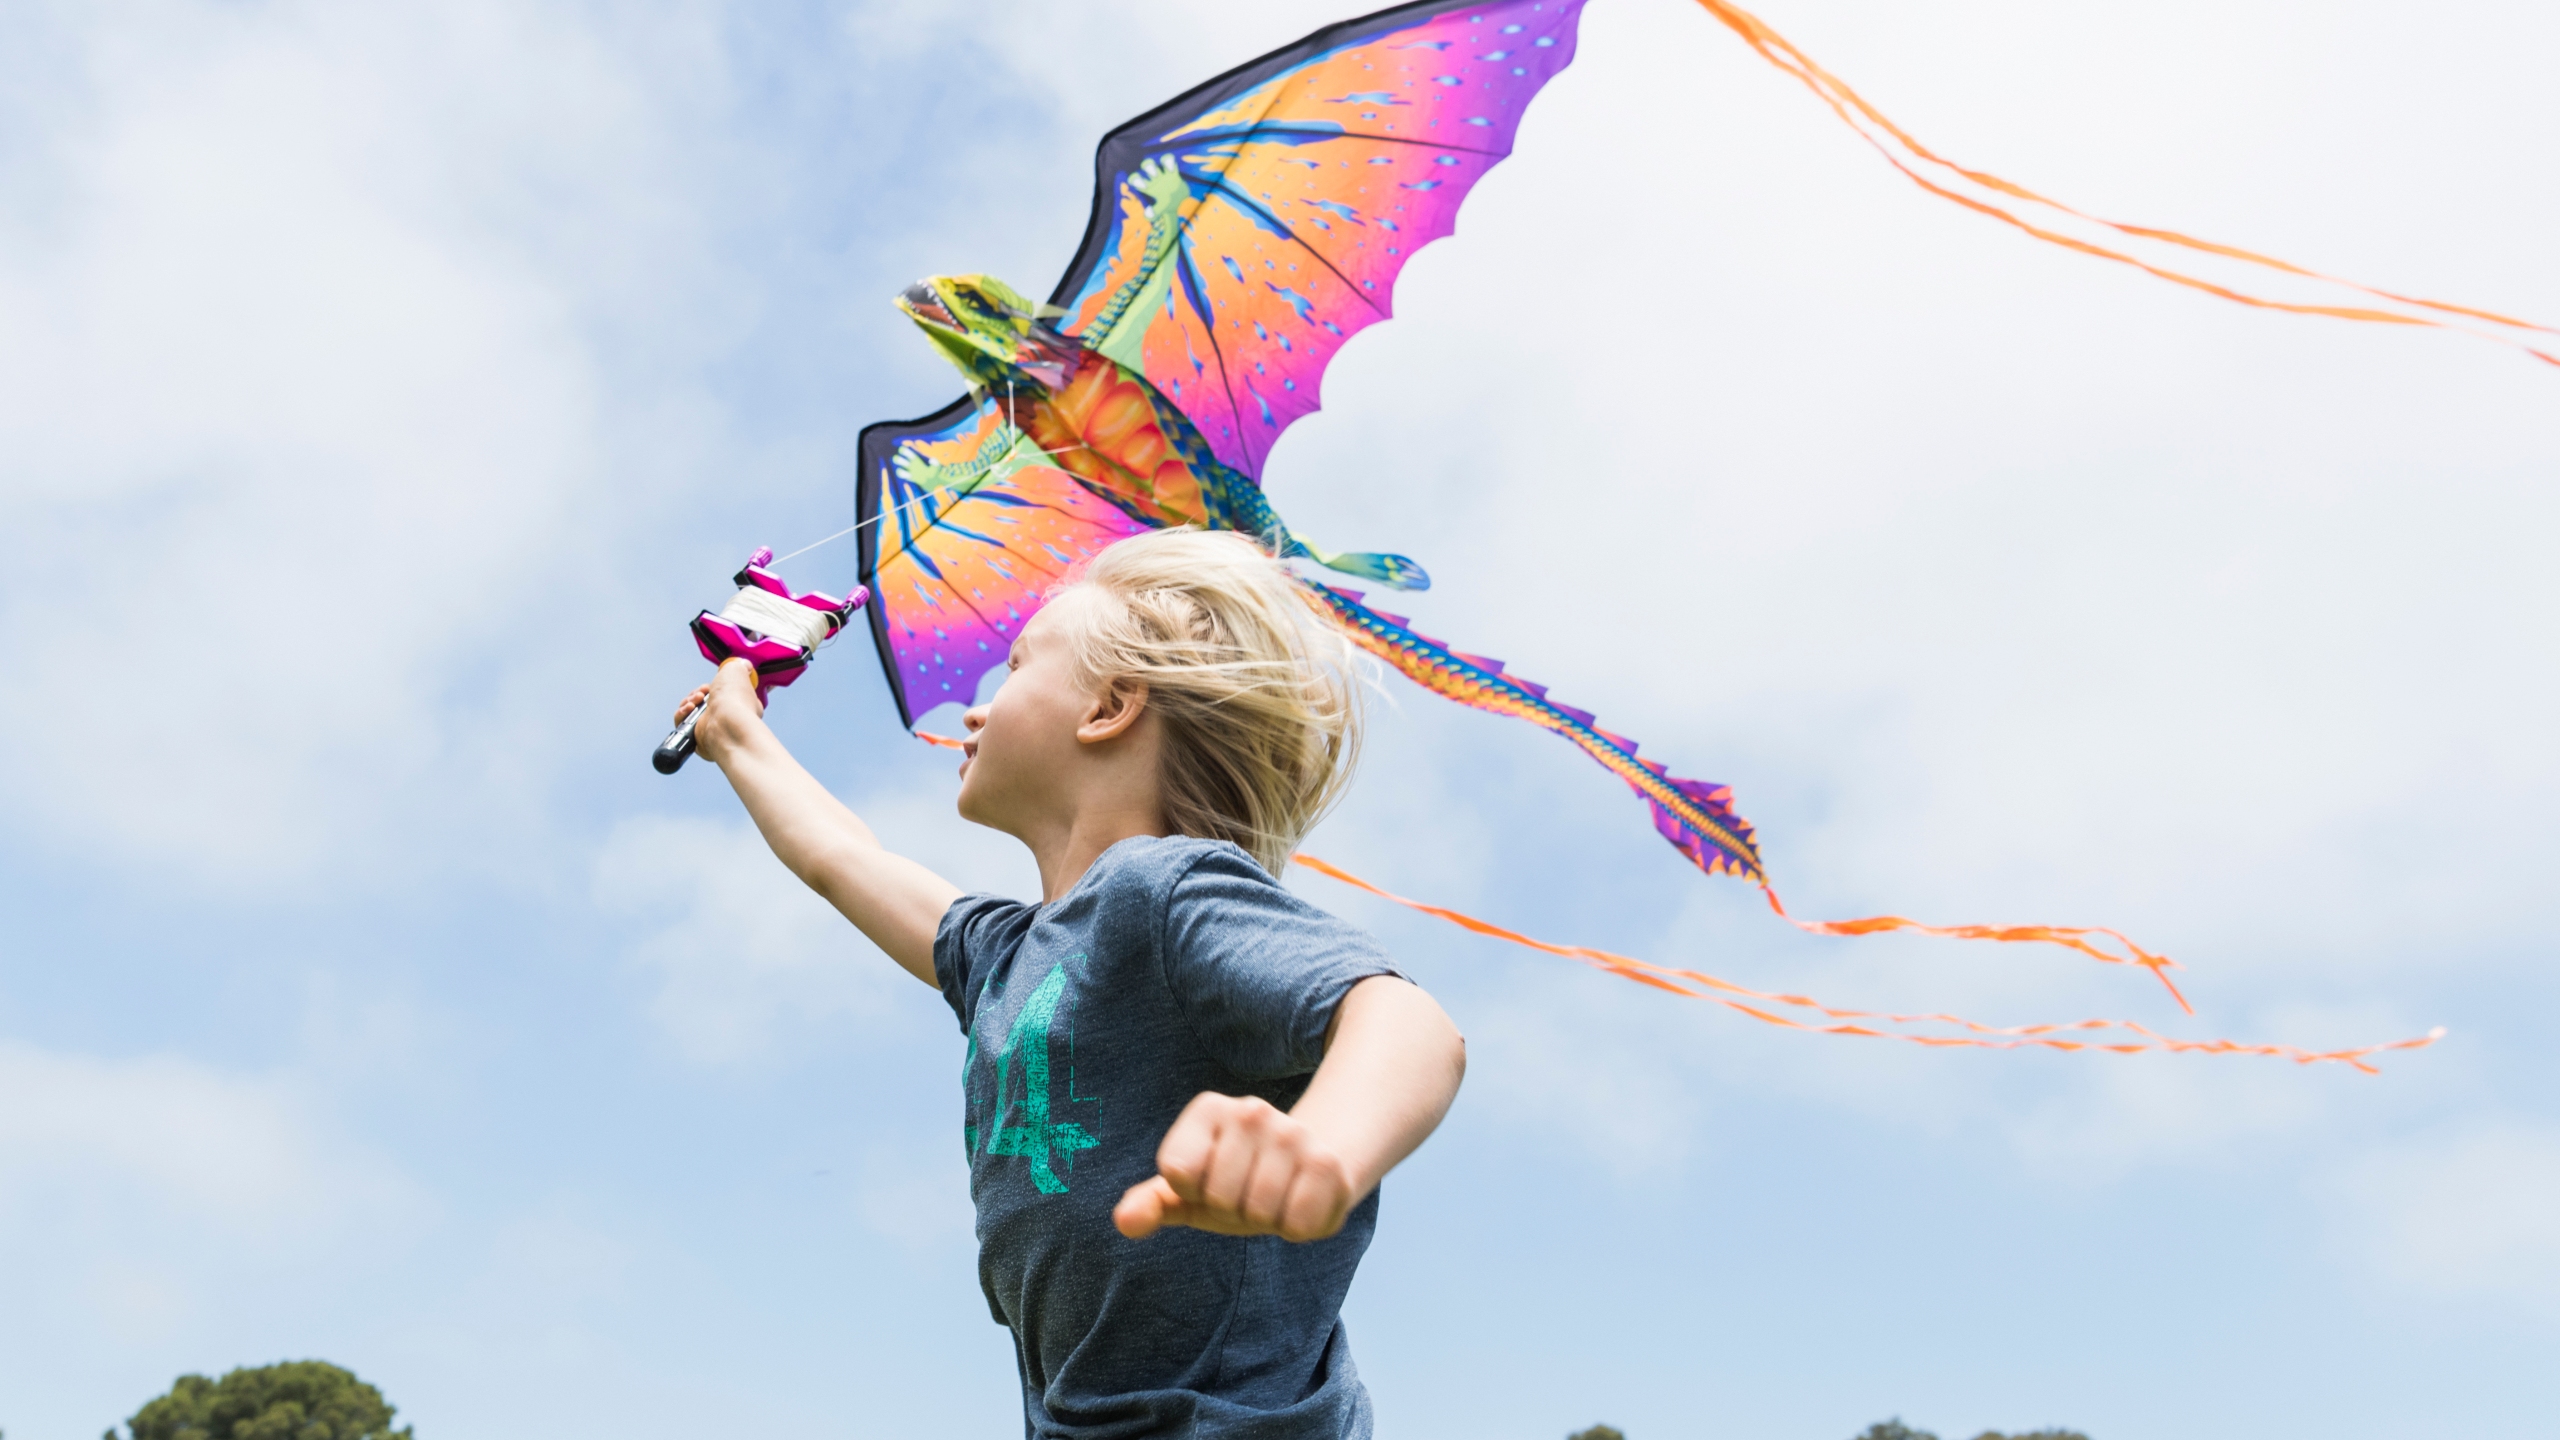 Let's go fly a kite at the Community Kite Festival this weekend